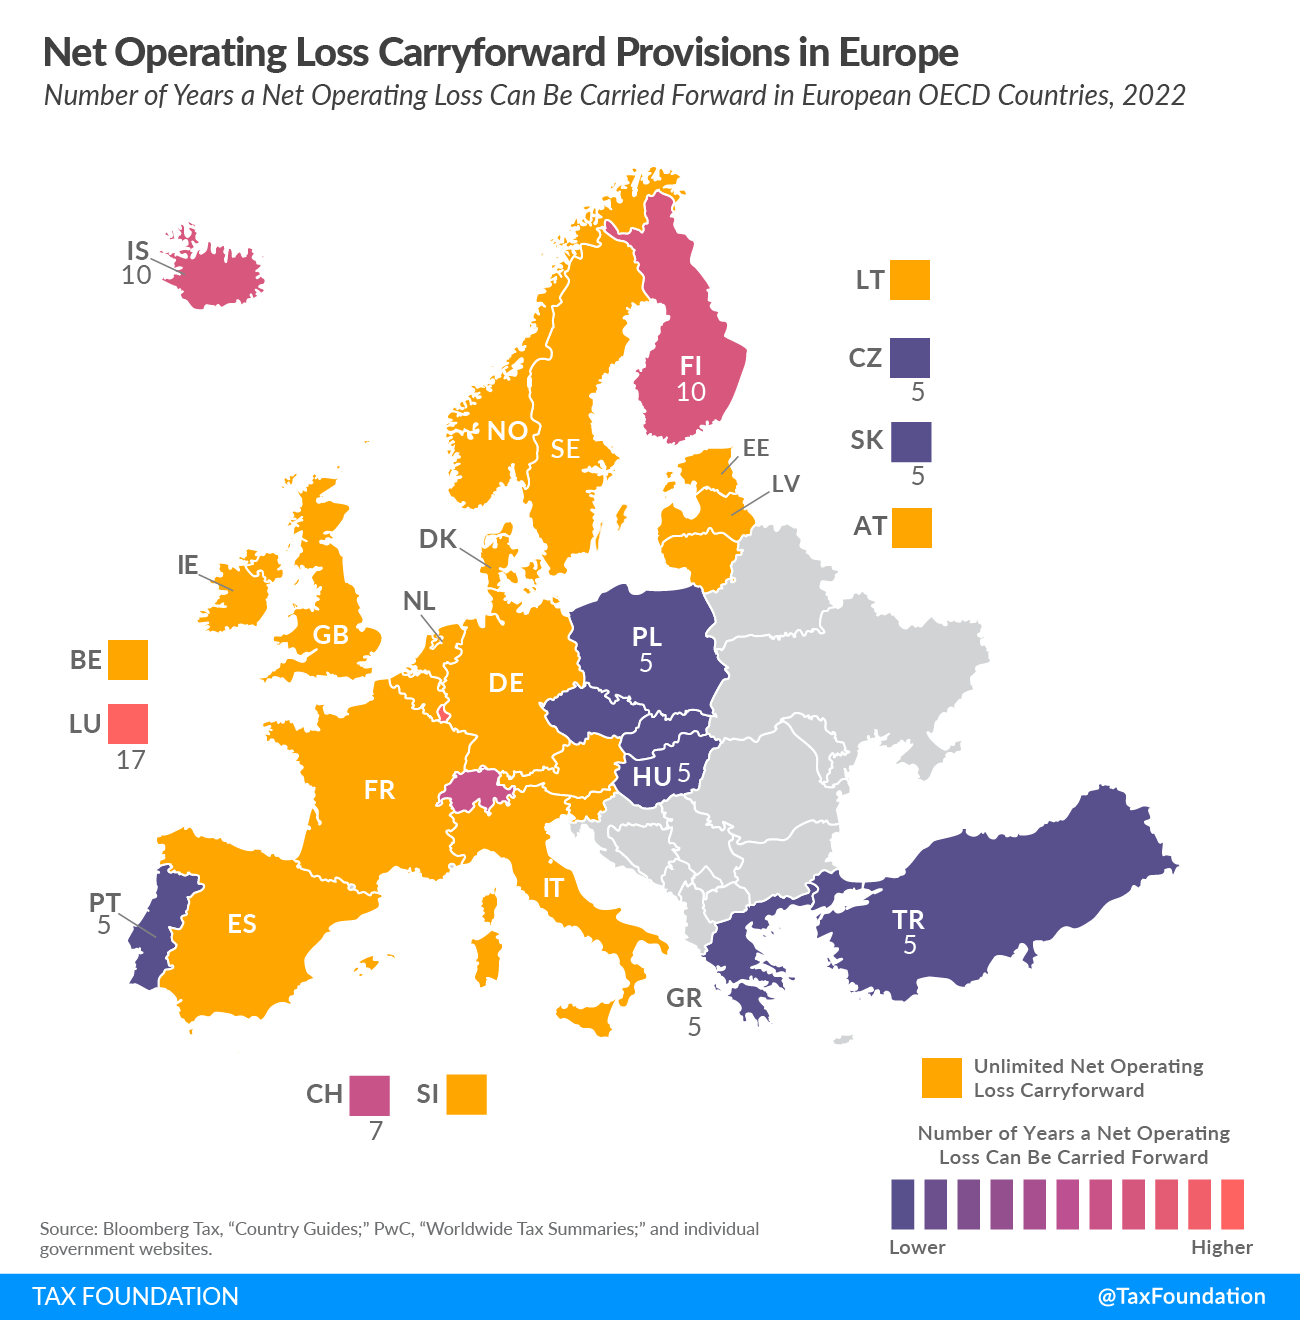 Net Operating Loss Carryforward and net operating loss Carryback Provisions and deductions in Europe 2022